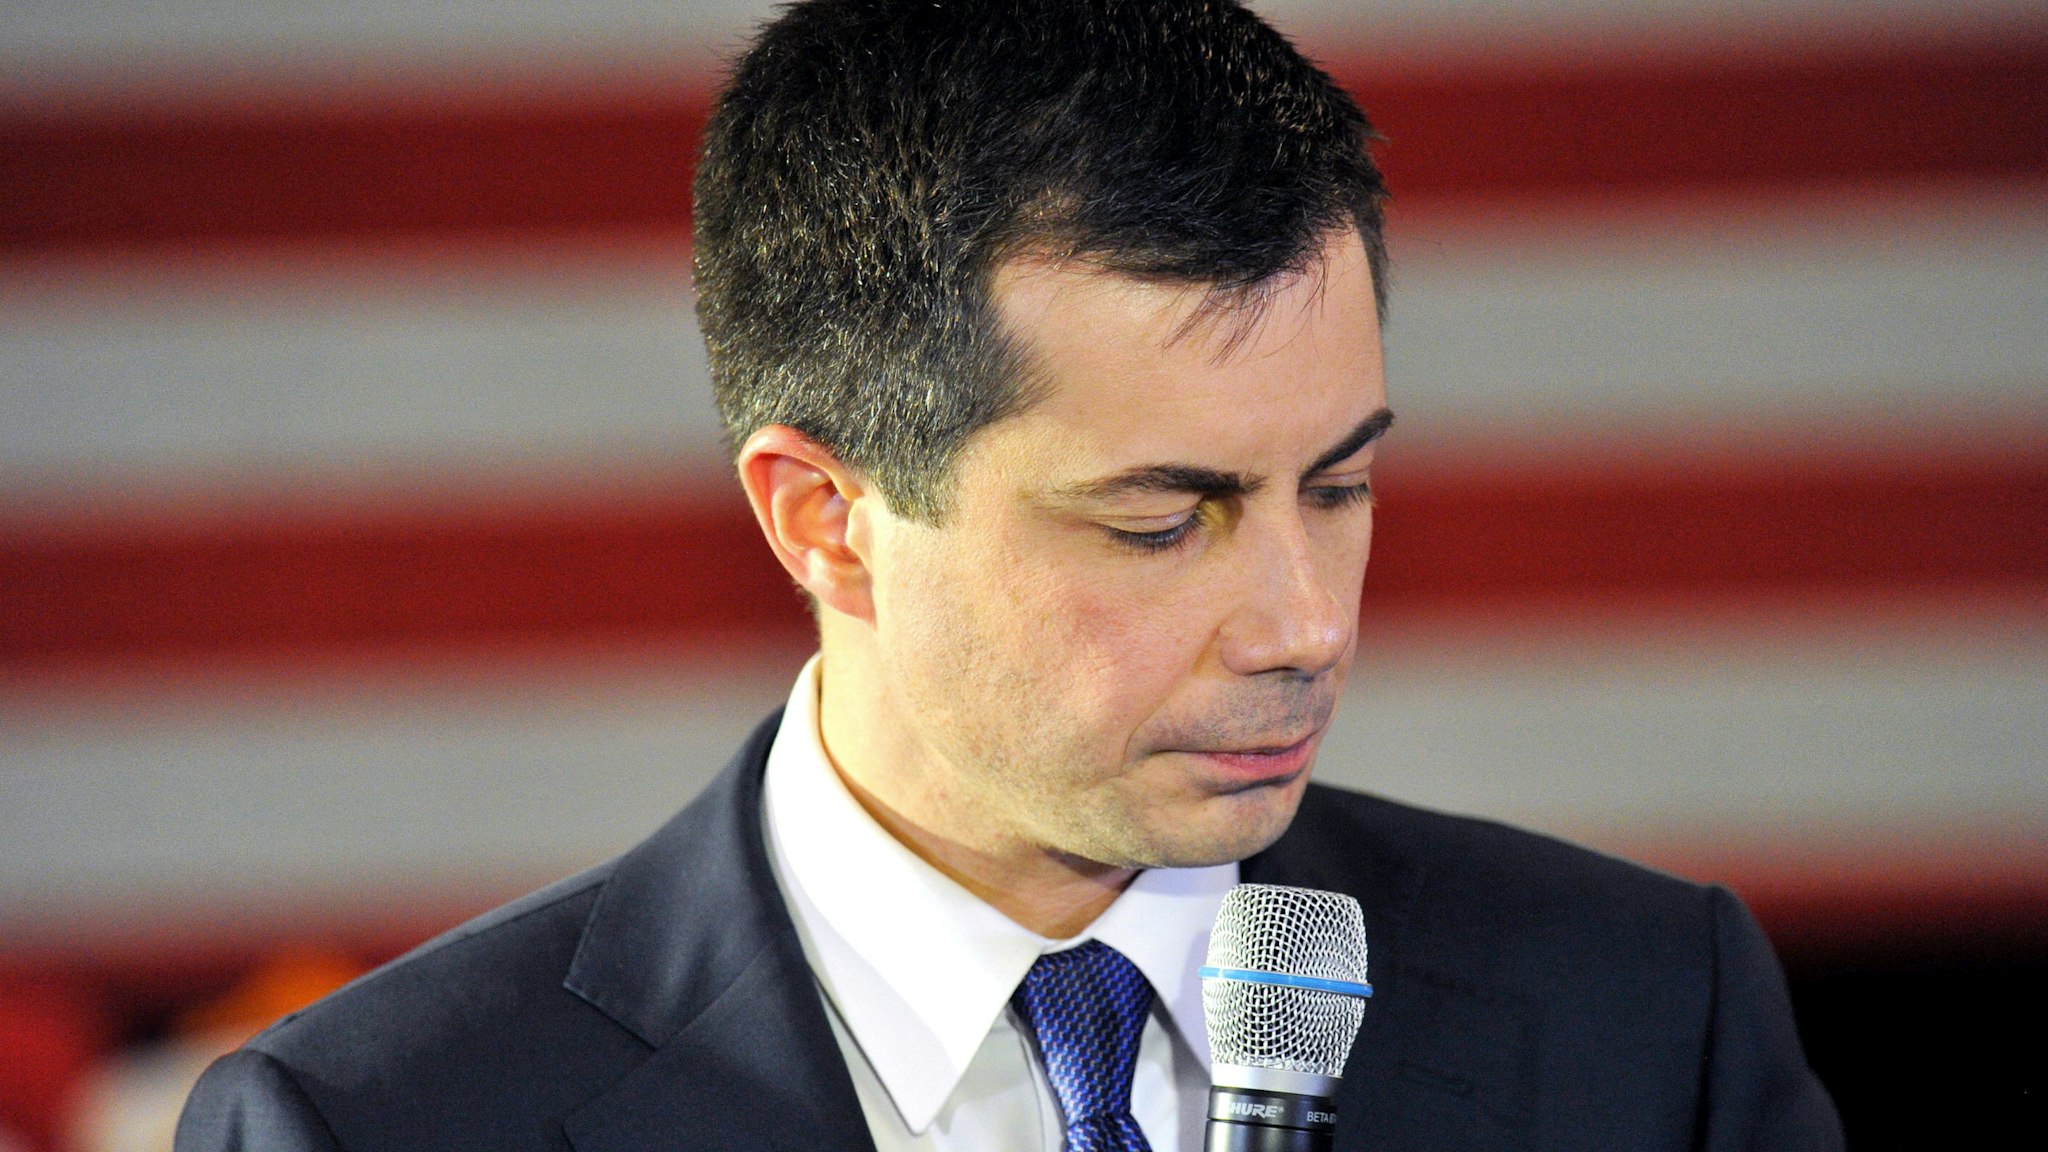 US Presidential Candidate and former South Bend, Indiana mayor Pete Buttigieg speaks to veterans and members of the public at a town hall event at the American Legion Post 98 in Merrimack, New Hampshire on February 6, 2020.